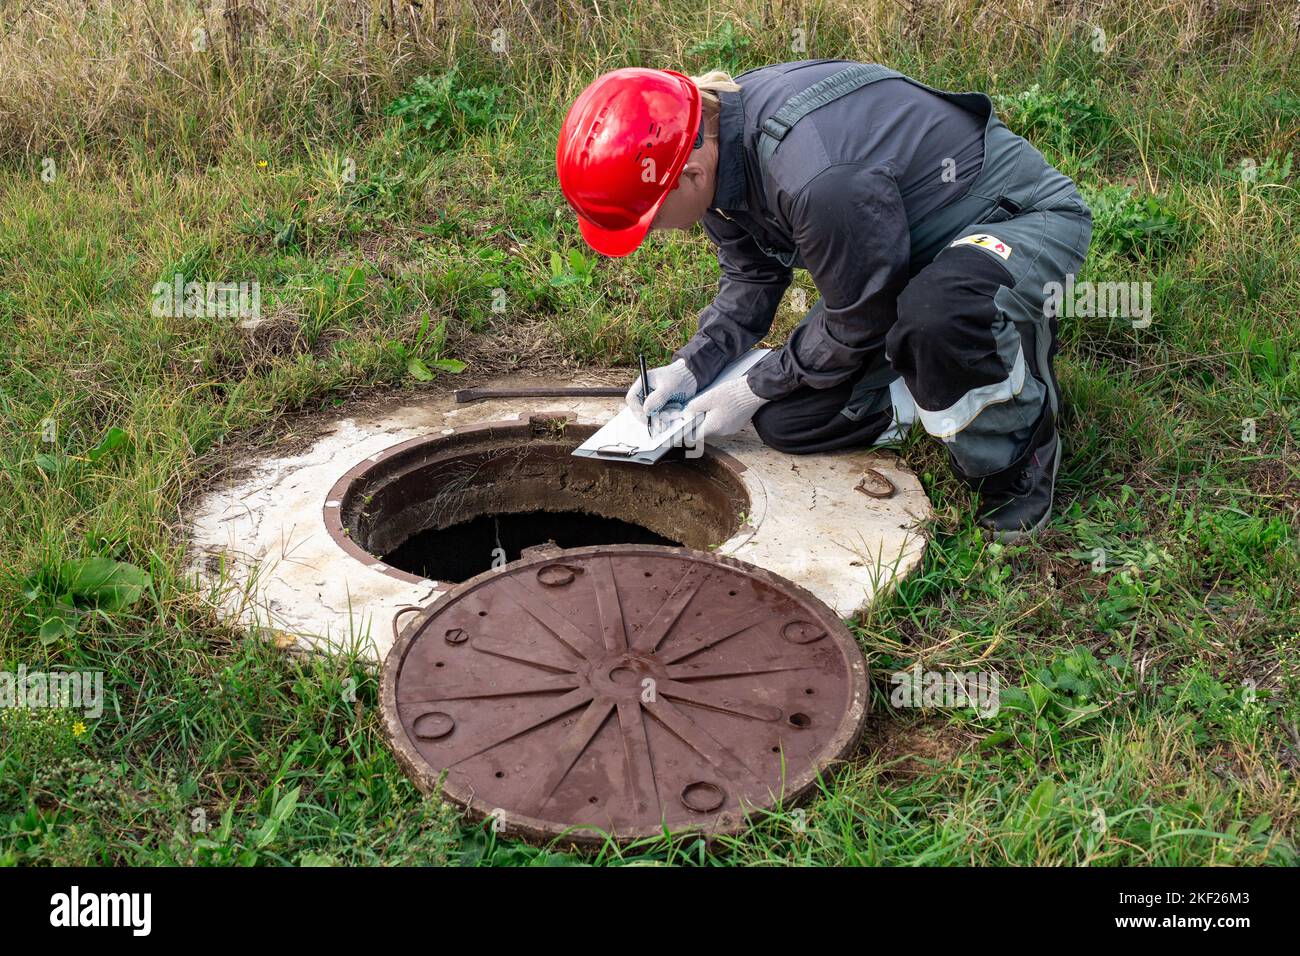 A male plumber in overalls and a helmet near a water well writes down the measurements taken and the readings of the water meter. Stock Photo